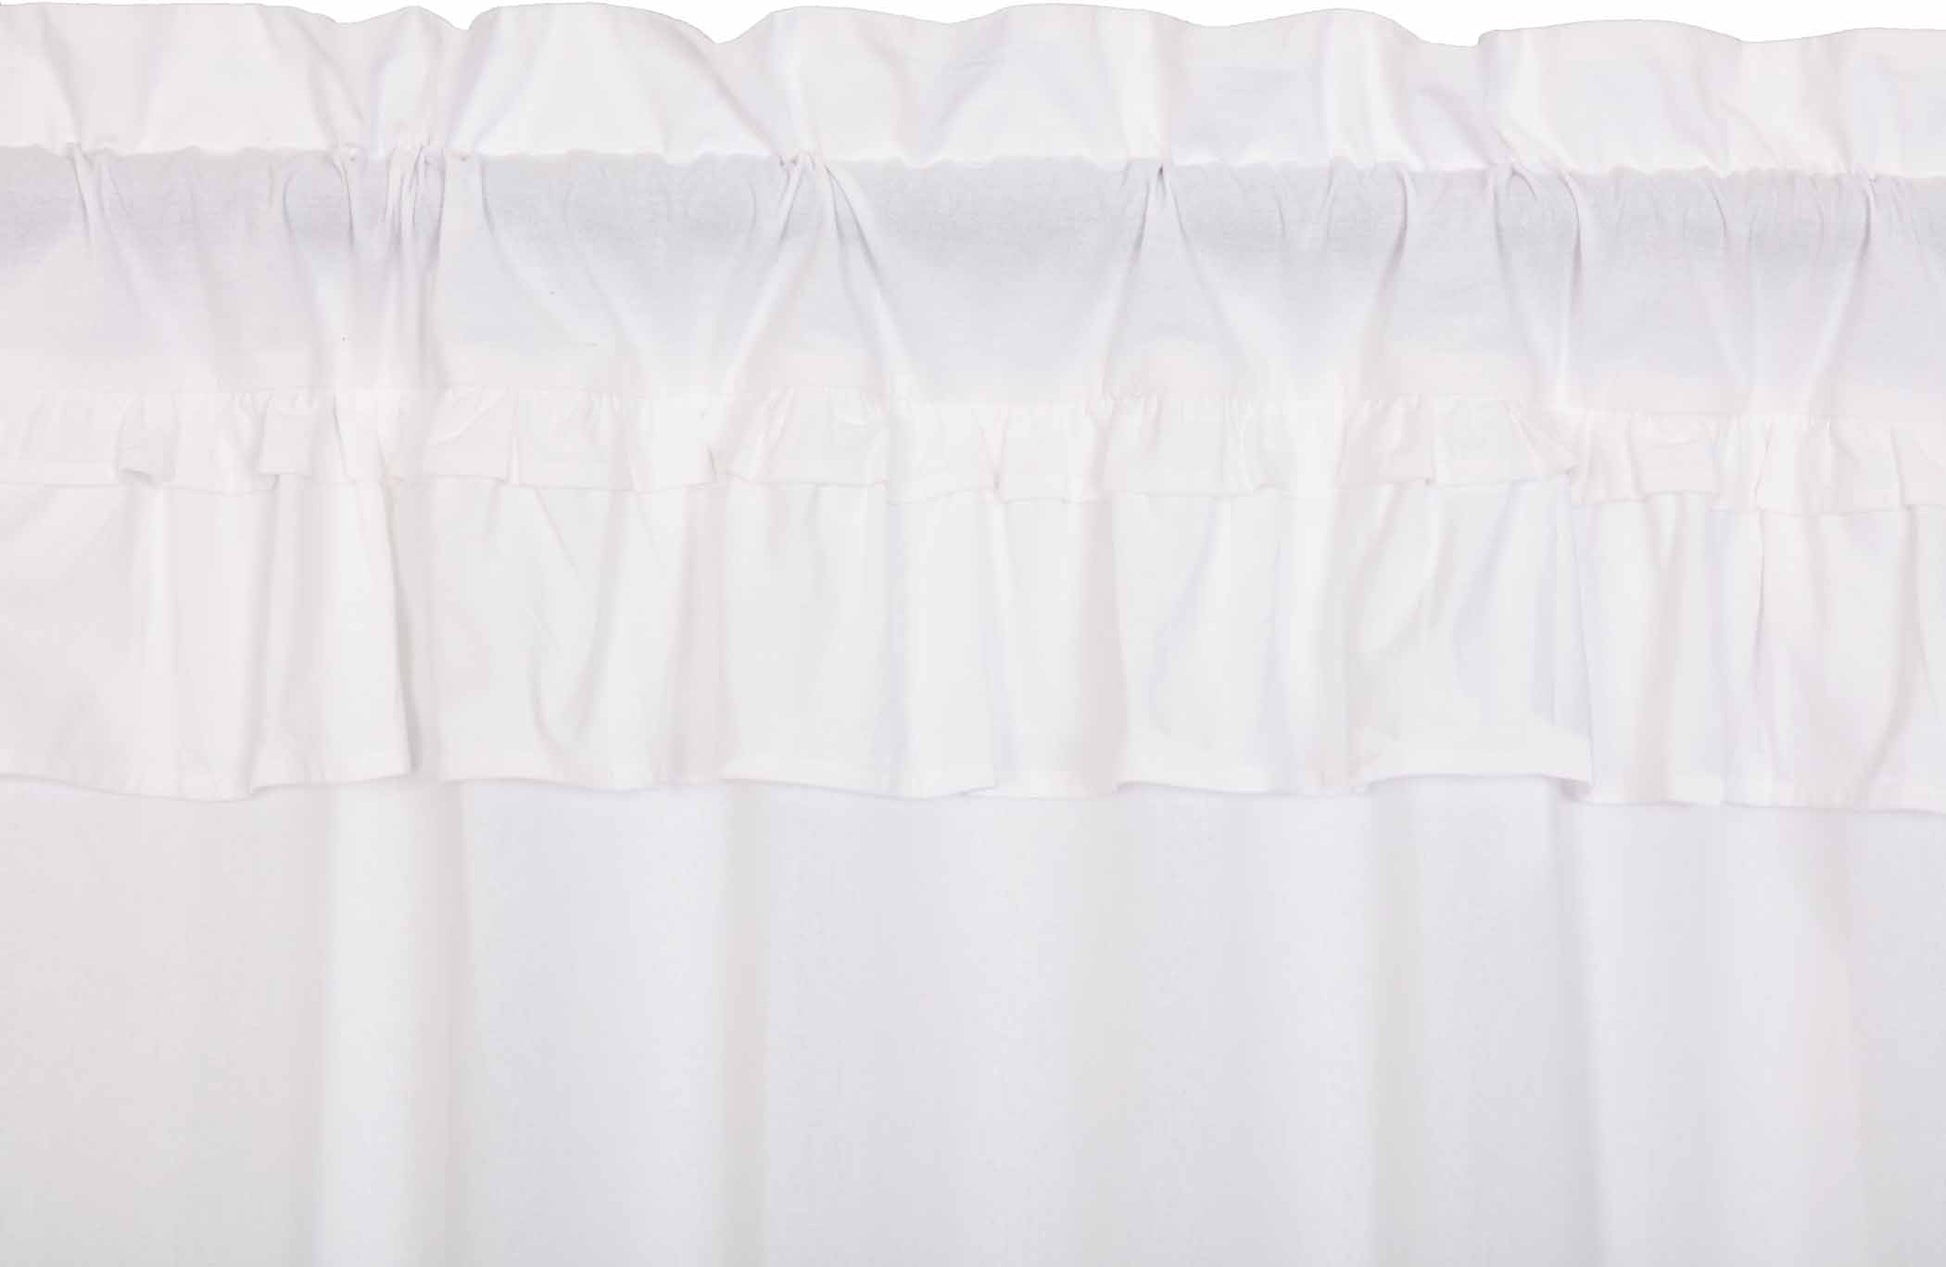 51993-Muslin-Ruffled-Bleached-White-Tier-Set-of-2-L24xW36-image-7